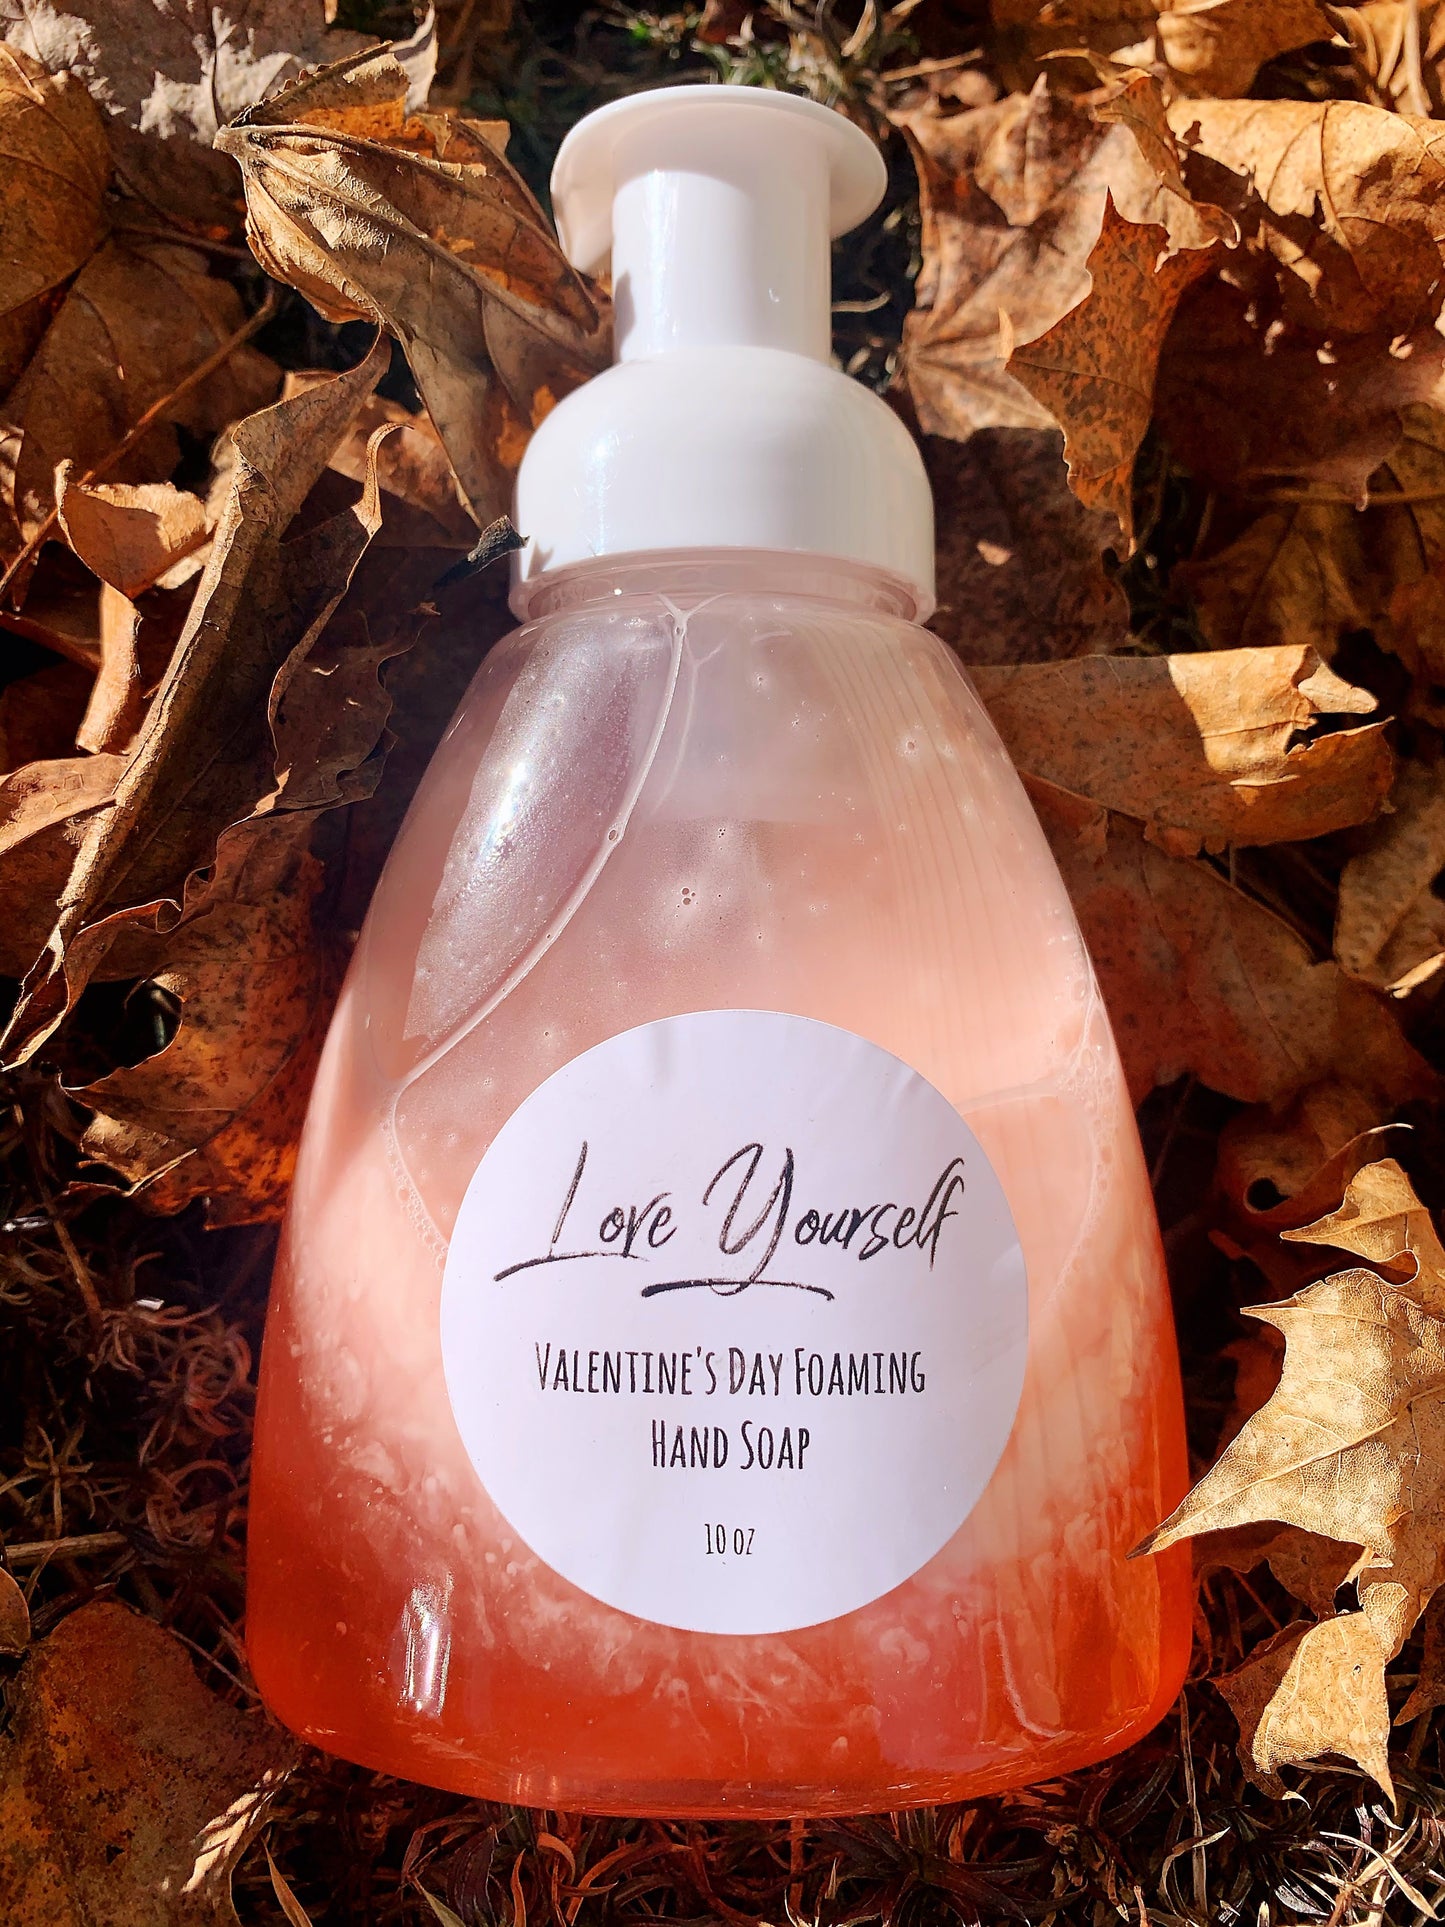 Valentine's Day Foaming Hand Soap by Love Yourself